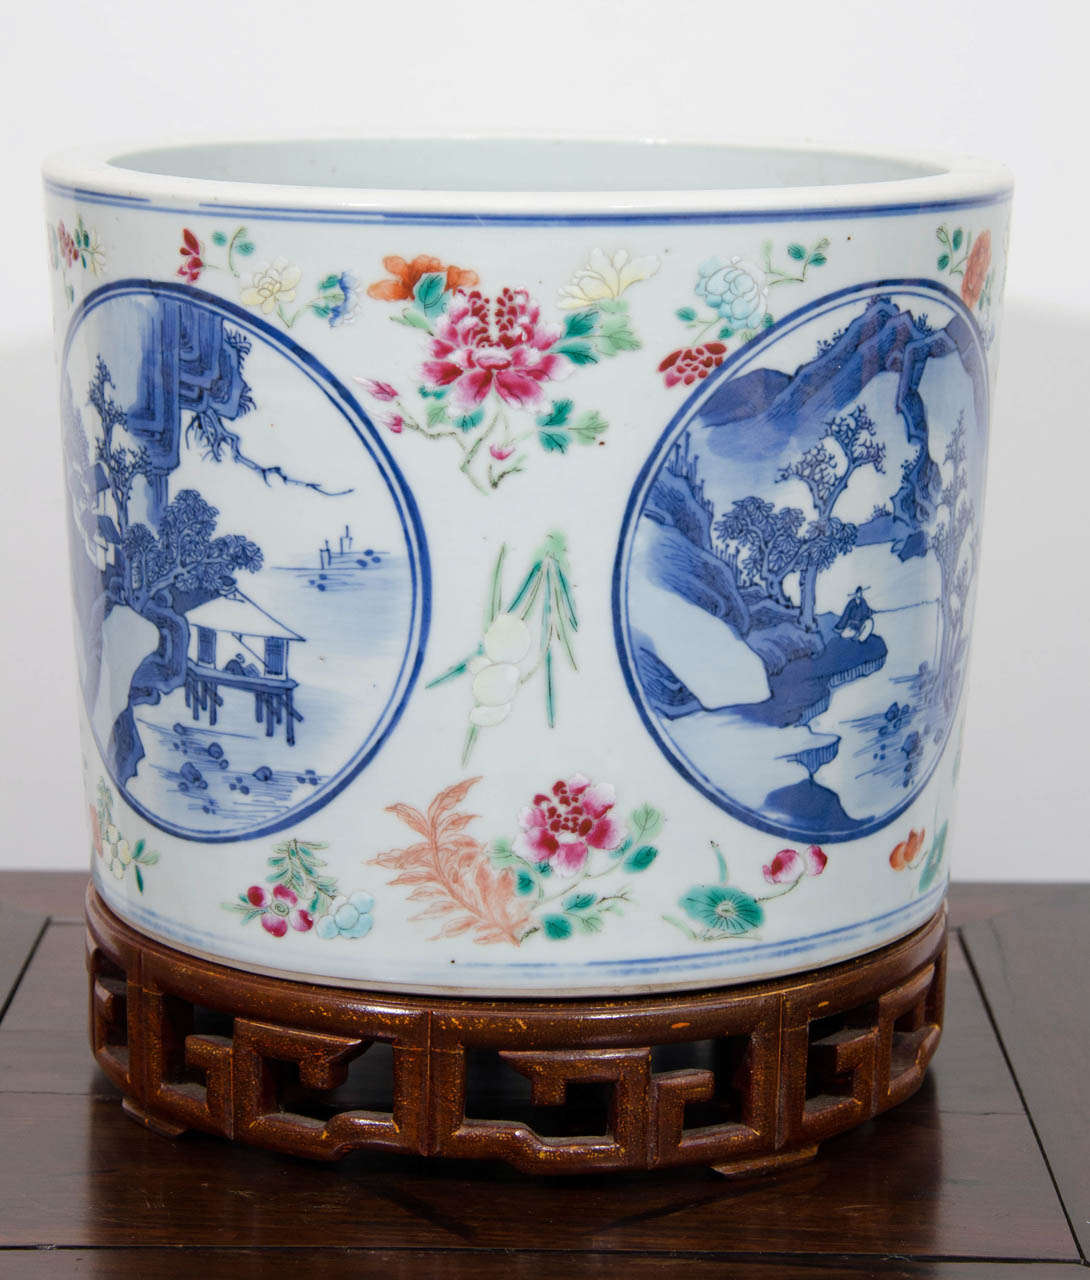 Large 19th Century Guangxu Period Chinese Porcelain Planter Depicting Four Noble Professions or Yuweng 3